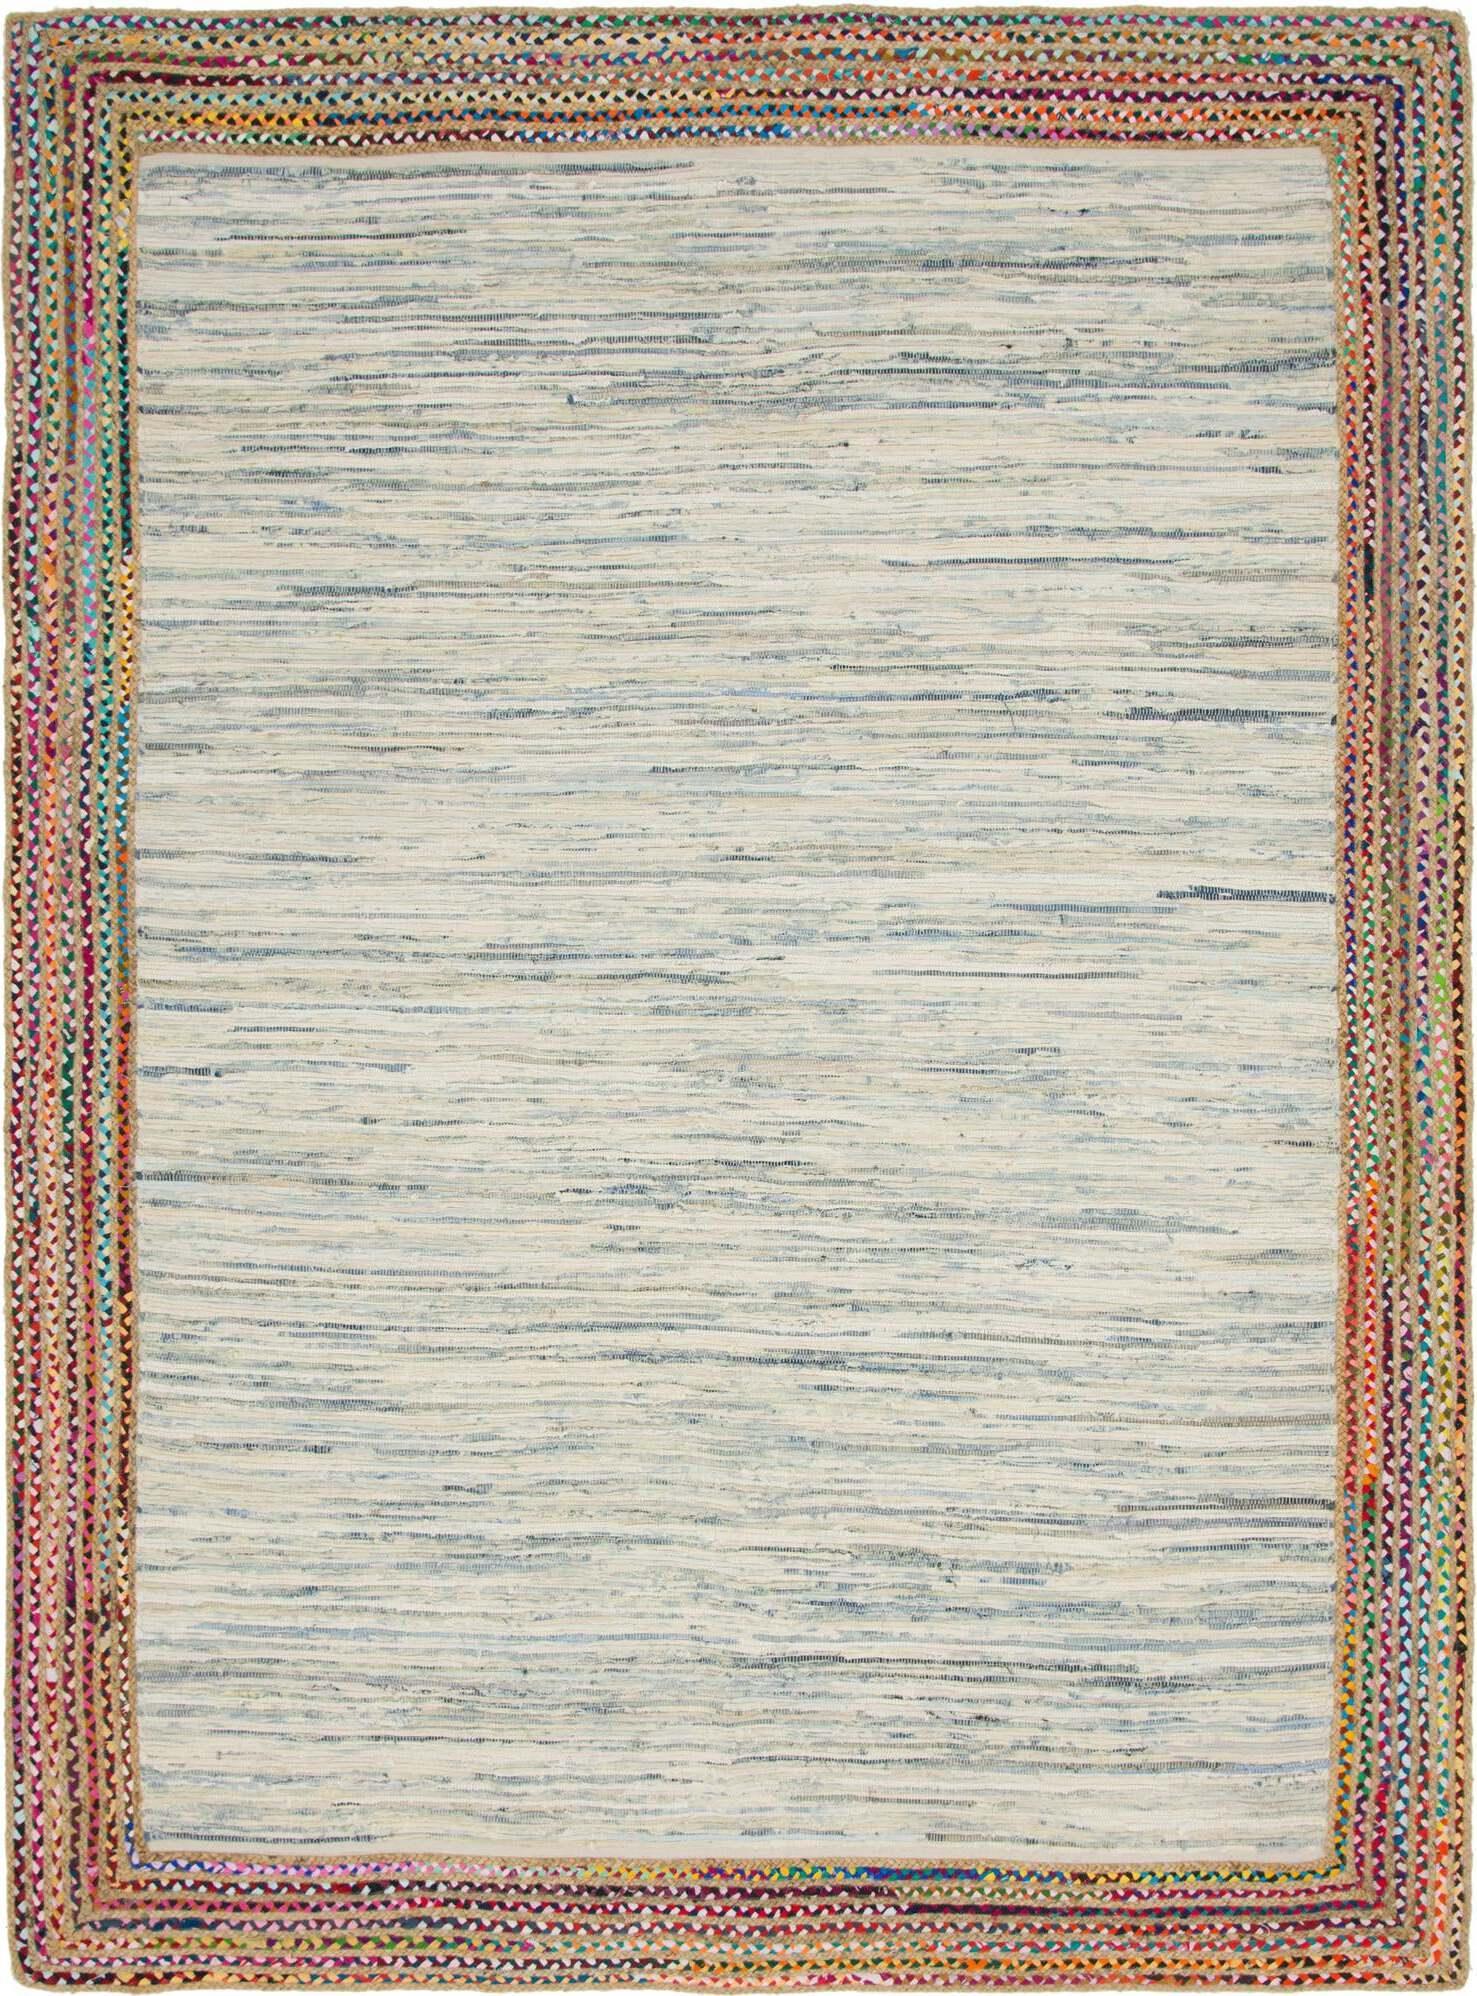 Unique Loom Indoor Rugs - Chindi Jute Striped Rectangular 9x12 Rug Ivory & Gray